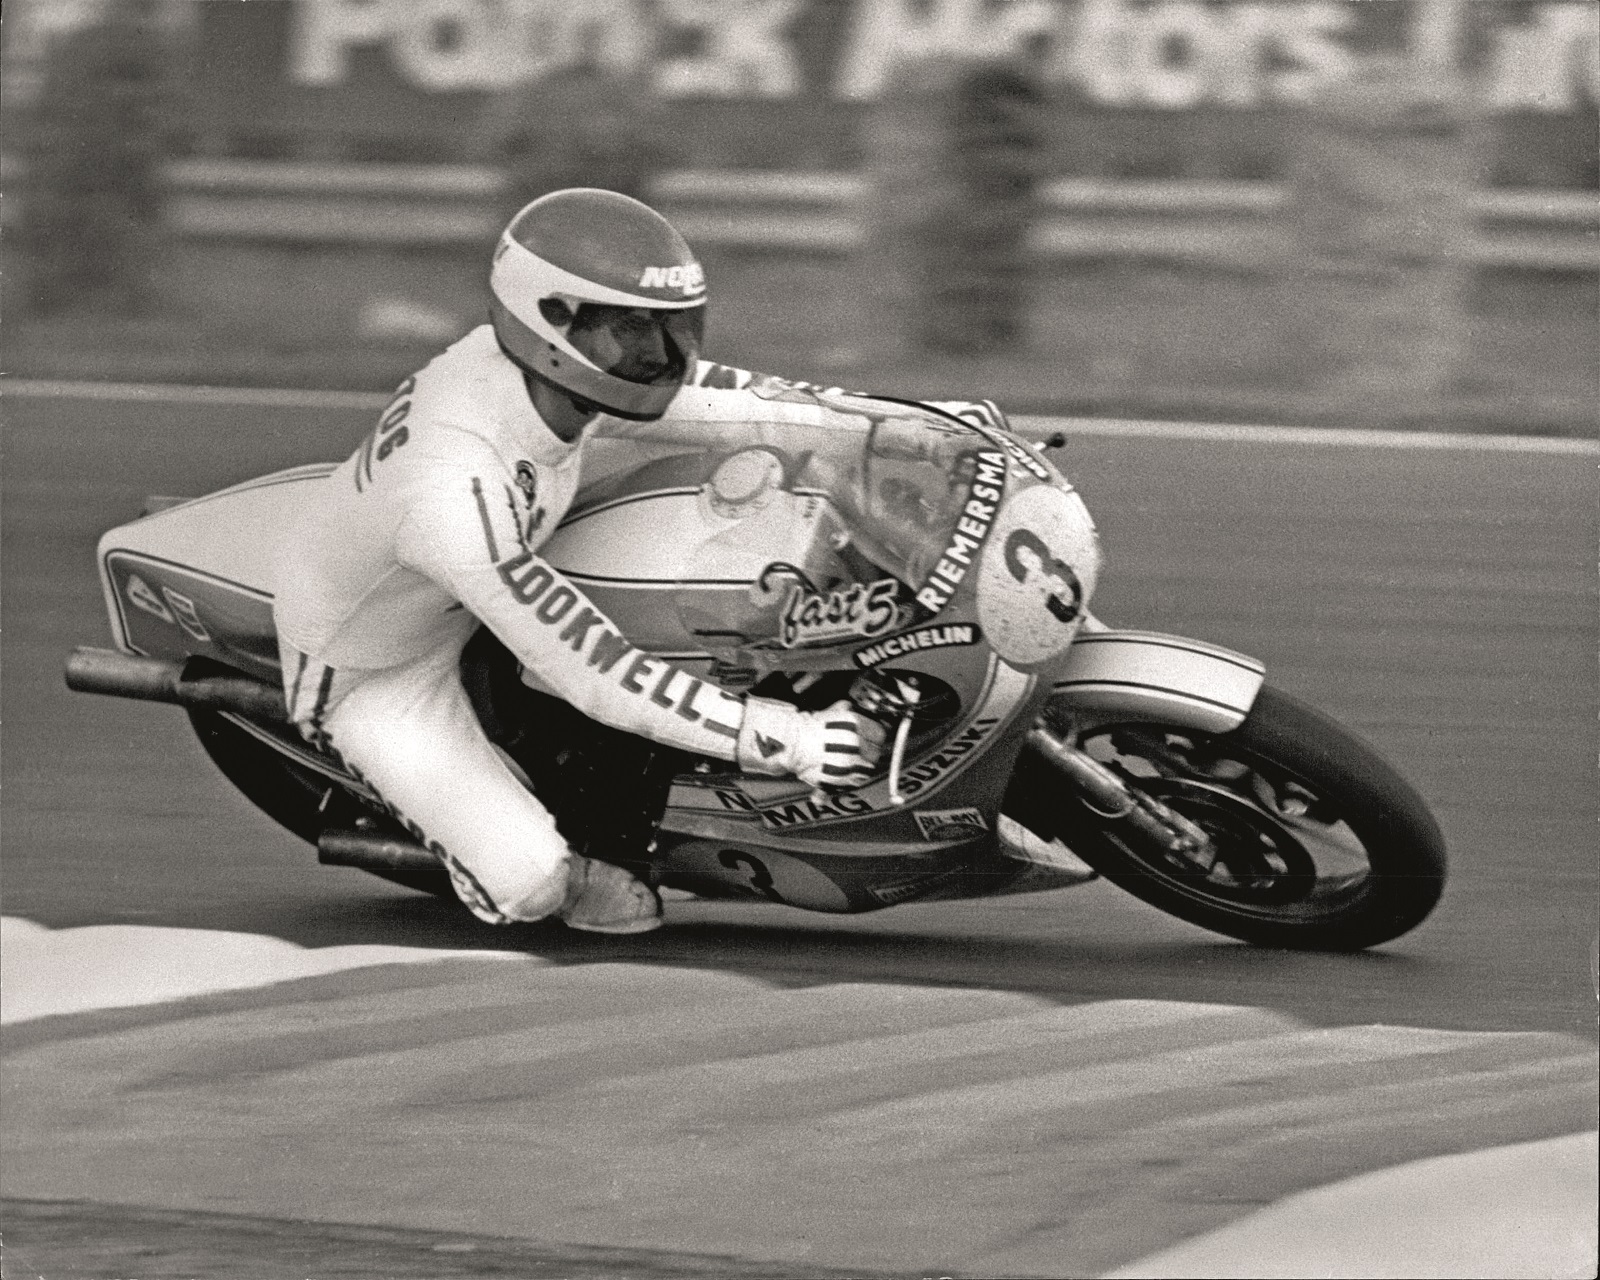 Aug. 13, 1979 - Kenny Roberts wins the British Grand at Silverstone: Kenny Roberts USA riding a Yamaha, won the British Grand Prix at Silverstone, second was Barry Sheene and third Wil Hartog of Holland. Photo Shows Wil Hartog, riding a Suzuki, during the race in which he finished third., Image: 209958475, License: Rights-managed, Restrictions: , Model Release: no, Credit line: Keystone Pictures USA / Zuma Press / Profimedia